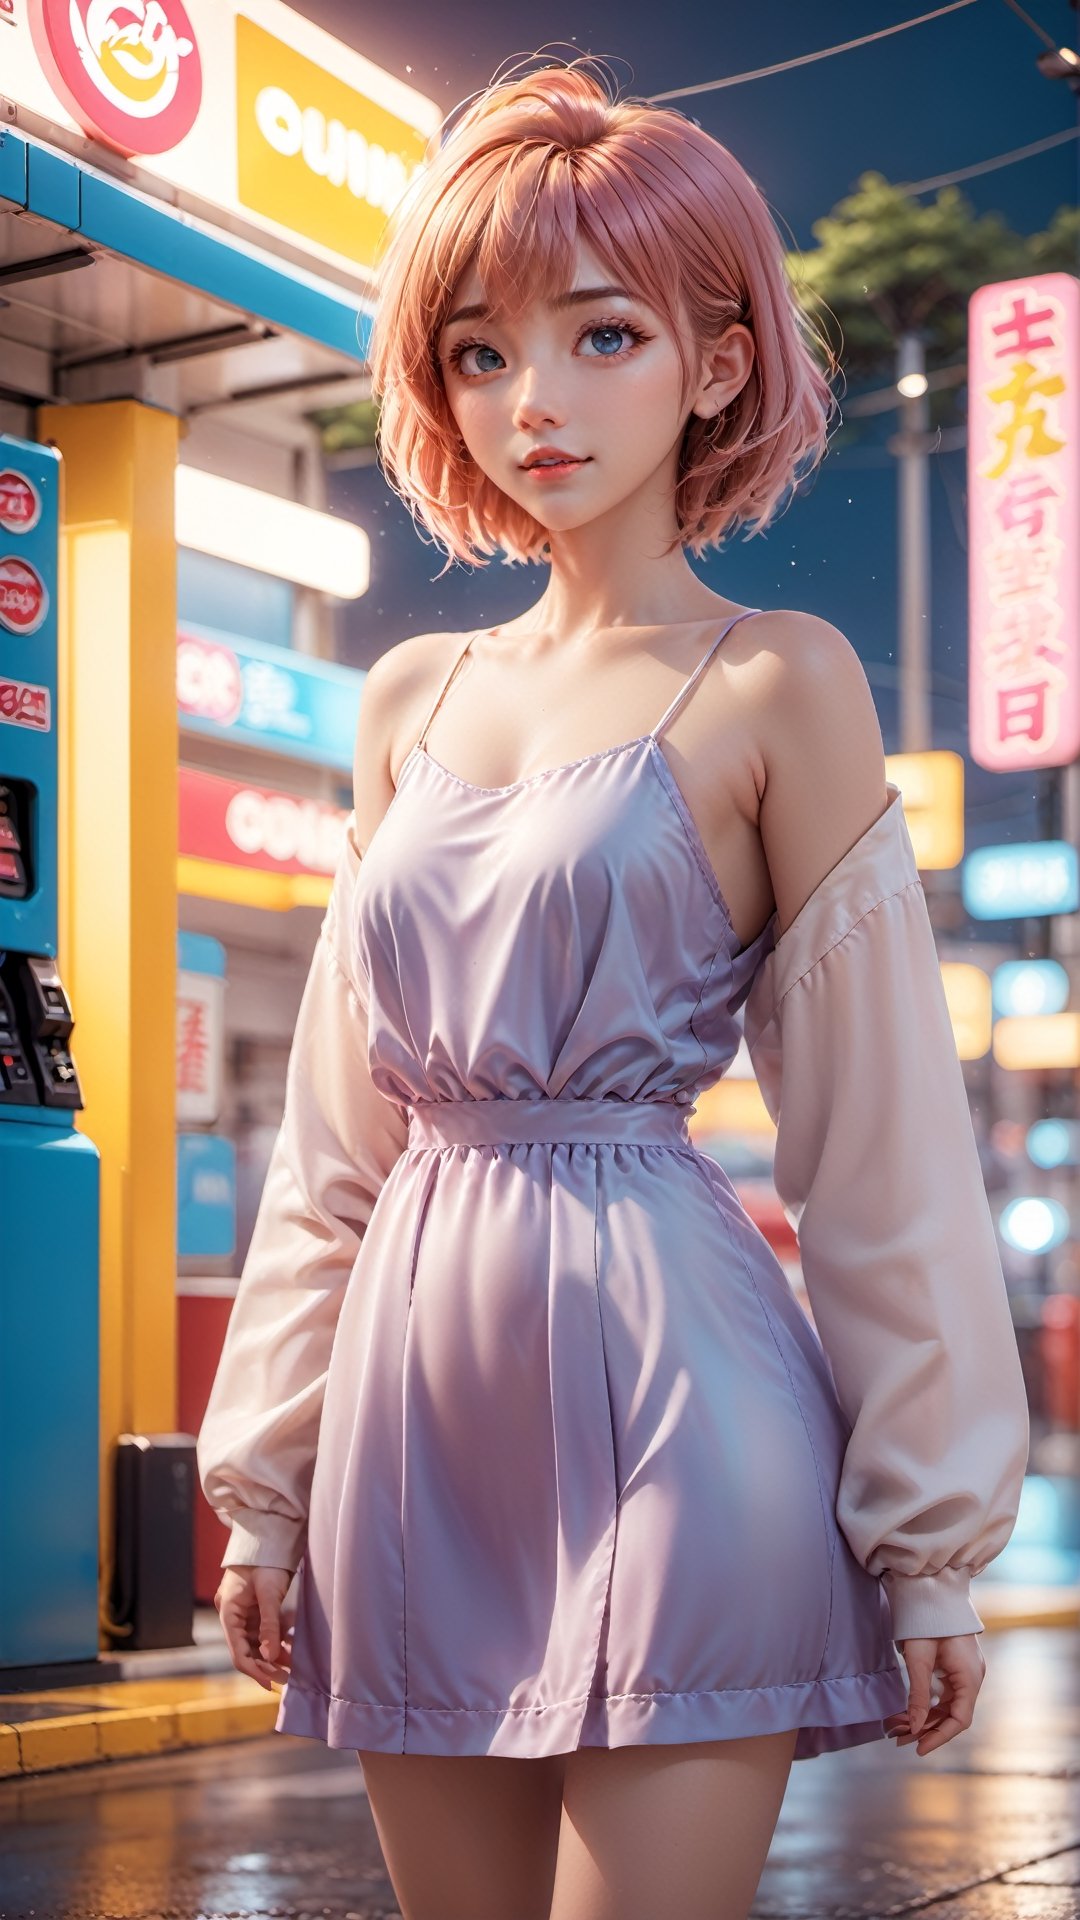 By Yves Di, a beautiful androgynous, satin slip dress, beautiful face, beautiful legs, light pind eyes, very happy face, full body, colorful colors, detailed background beautiful, gas station, rainny day,high quality, 8K Ultra HD, 3D effect, A digital illustration of anime style, soft anime tones, Atmosphere like Kyoto Animation, luminism, three dimensional effect, luminism, 3d render, octane render, Isometric, awesome full color, delicate and anime character expressions

